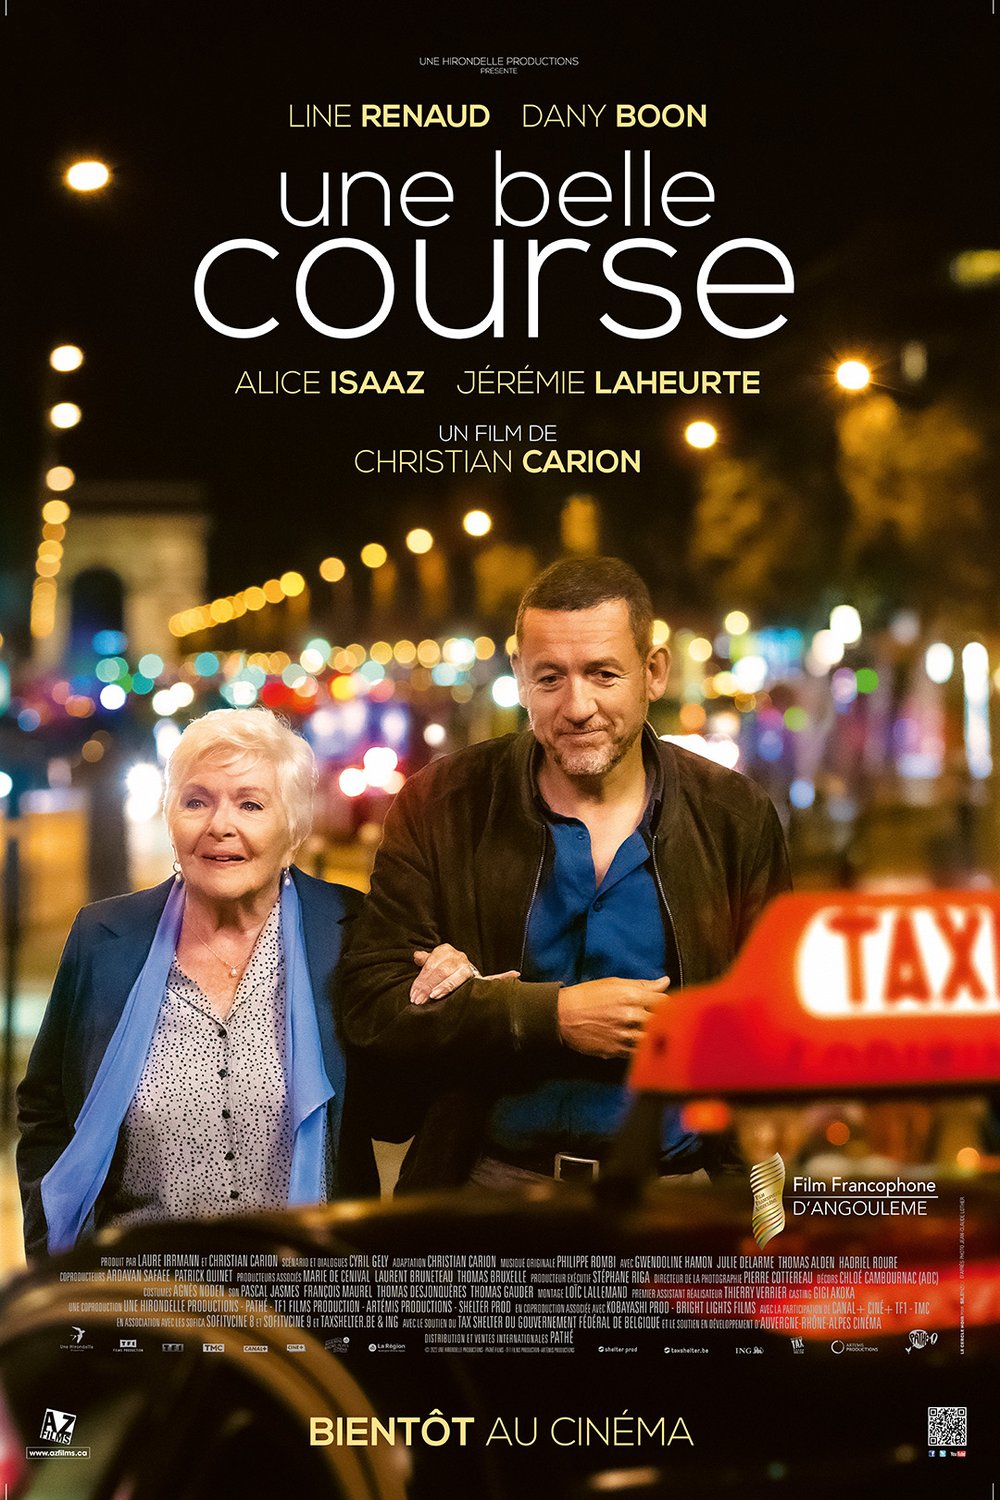 Poster of the movie Une belle course